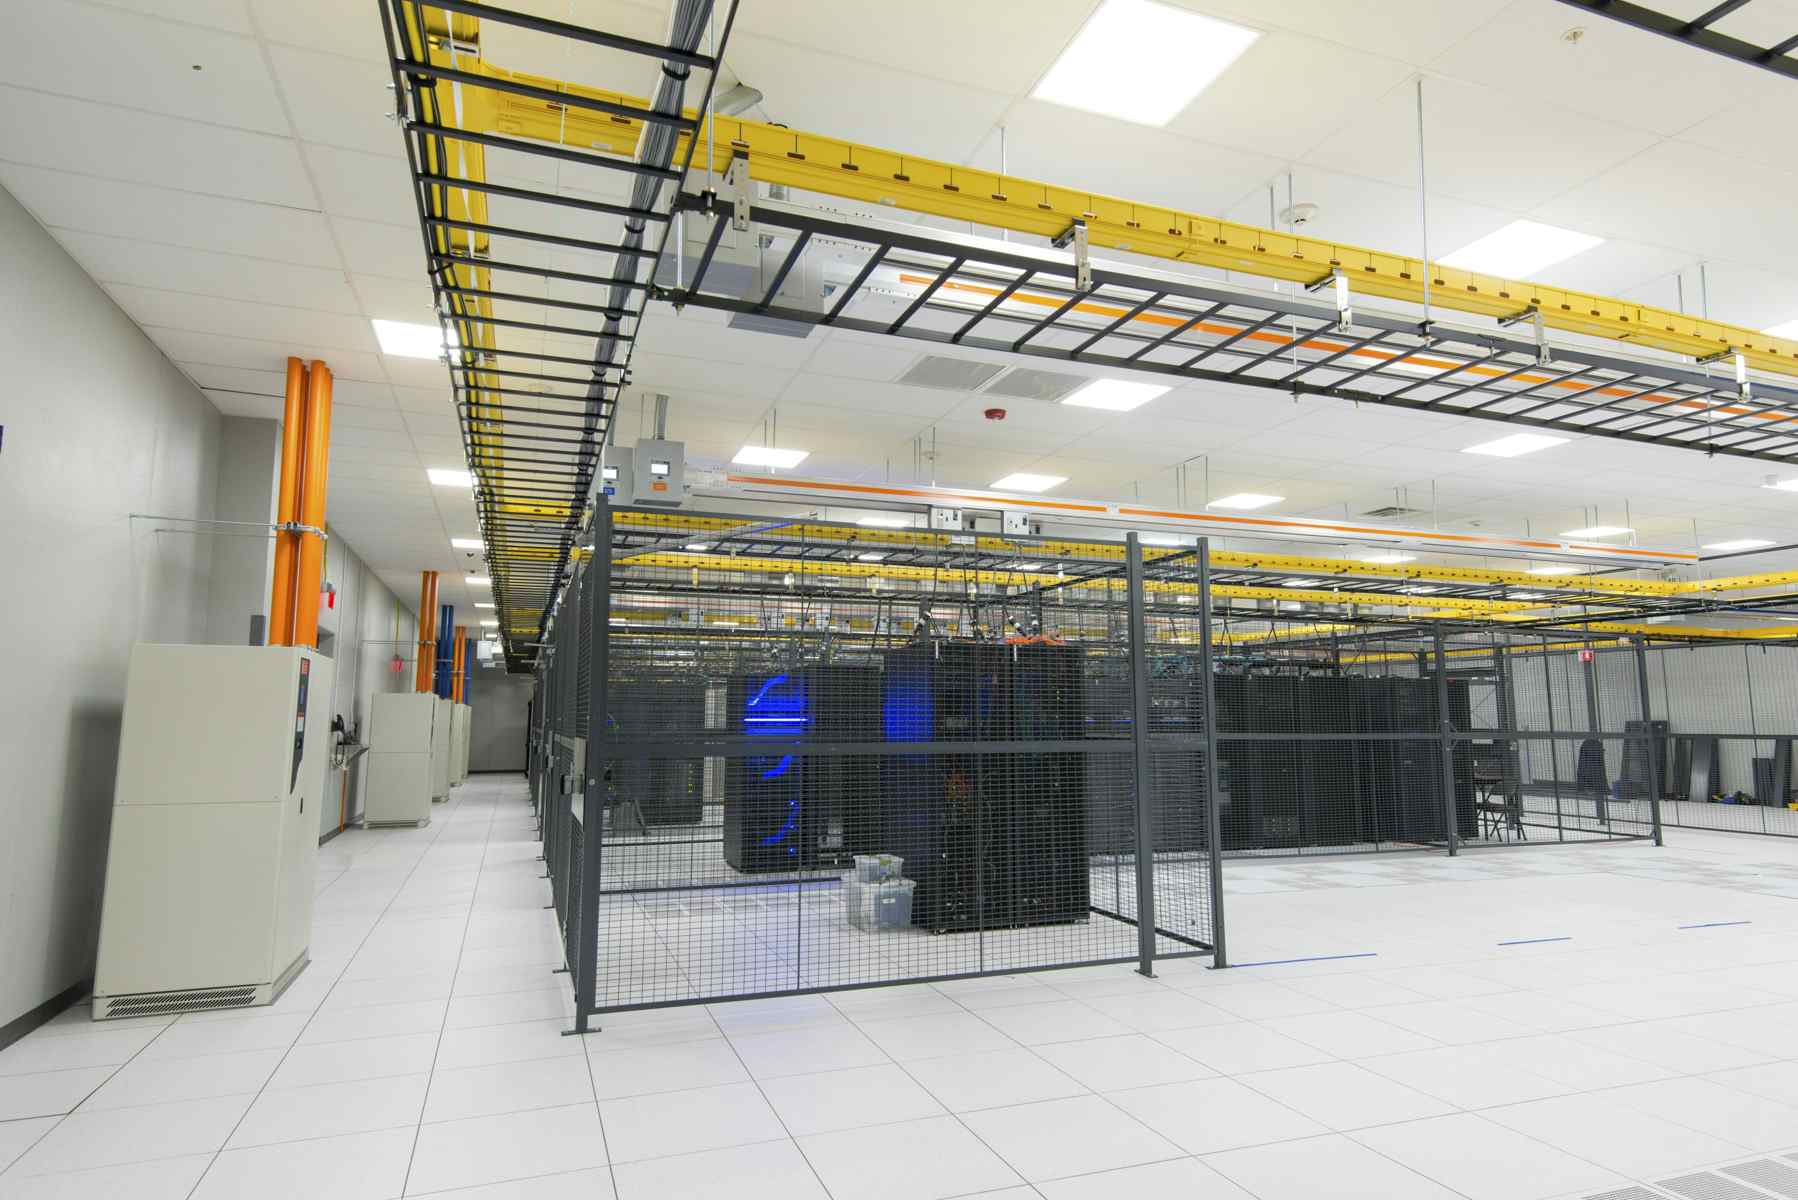 bos-1-data-center-cages.jpg